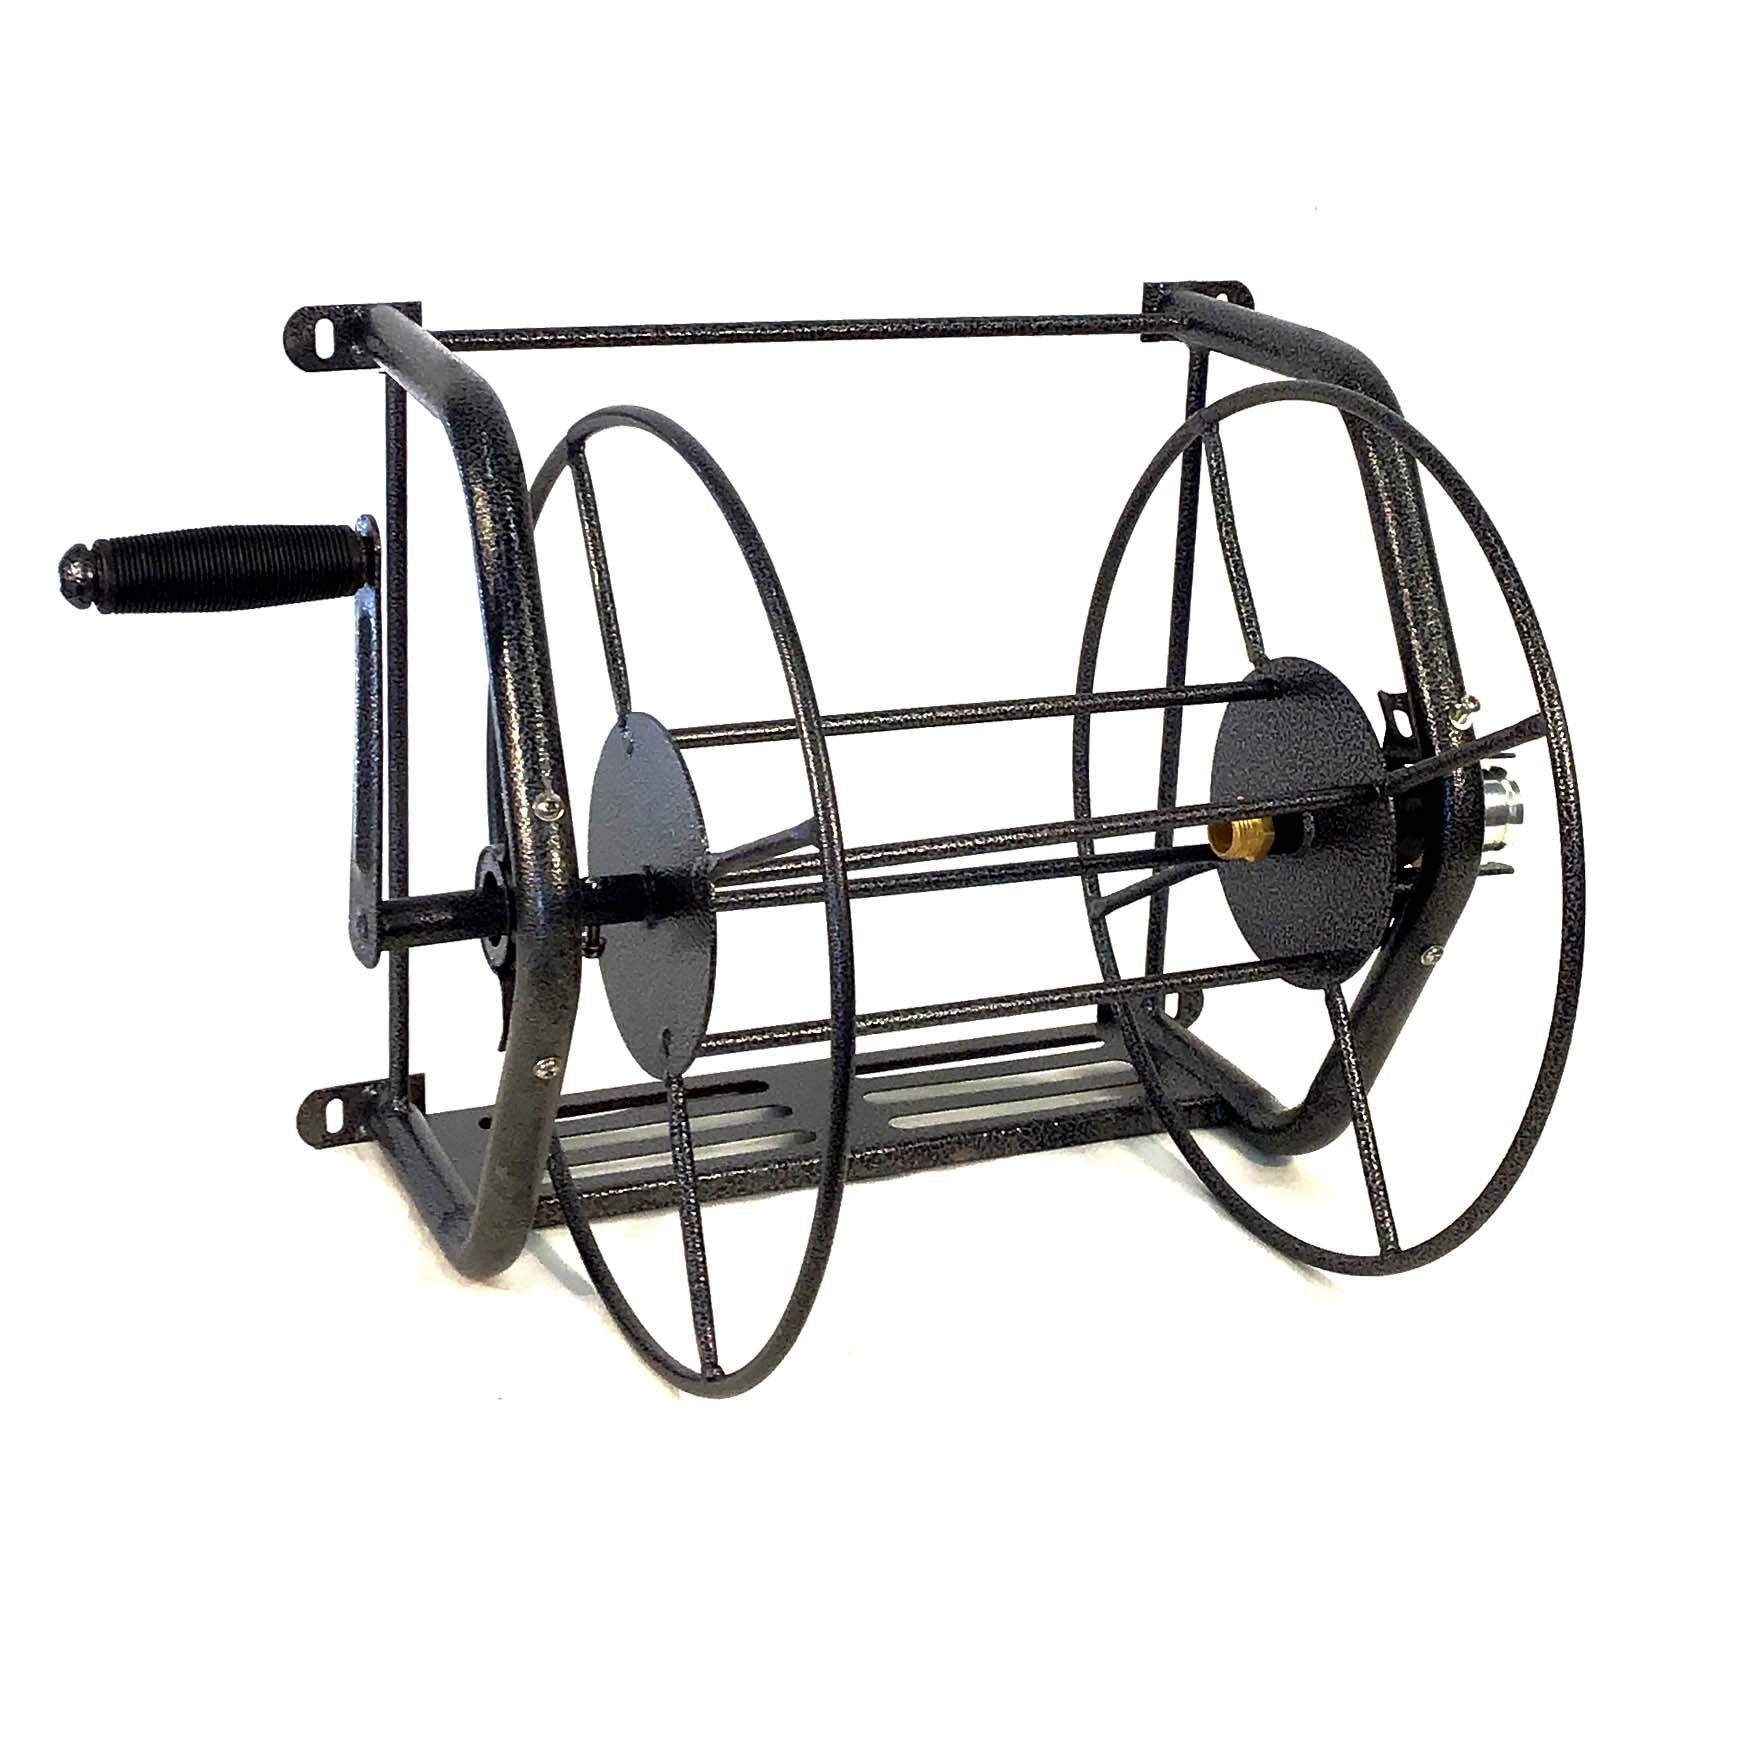 LS - Small Wall Mounted Hose Reel [50m x 1/2] Plastic Coated